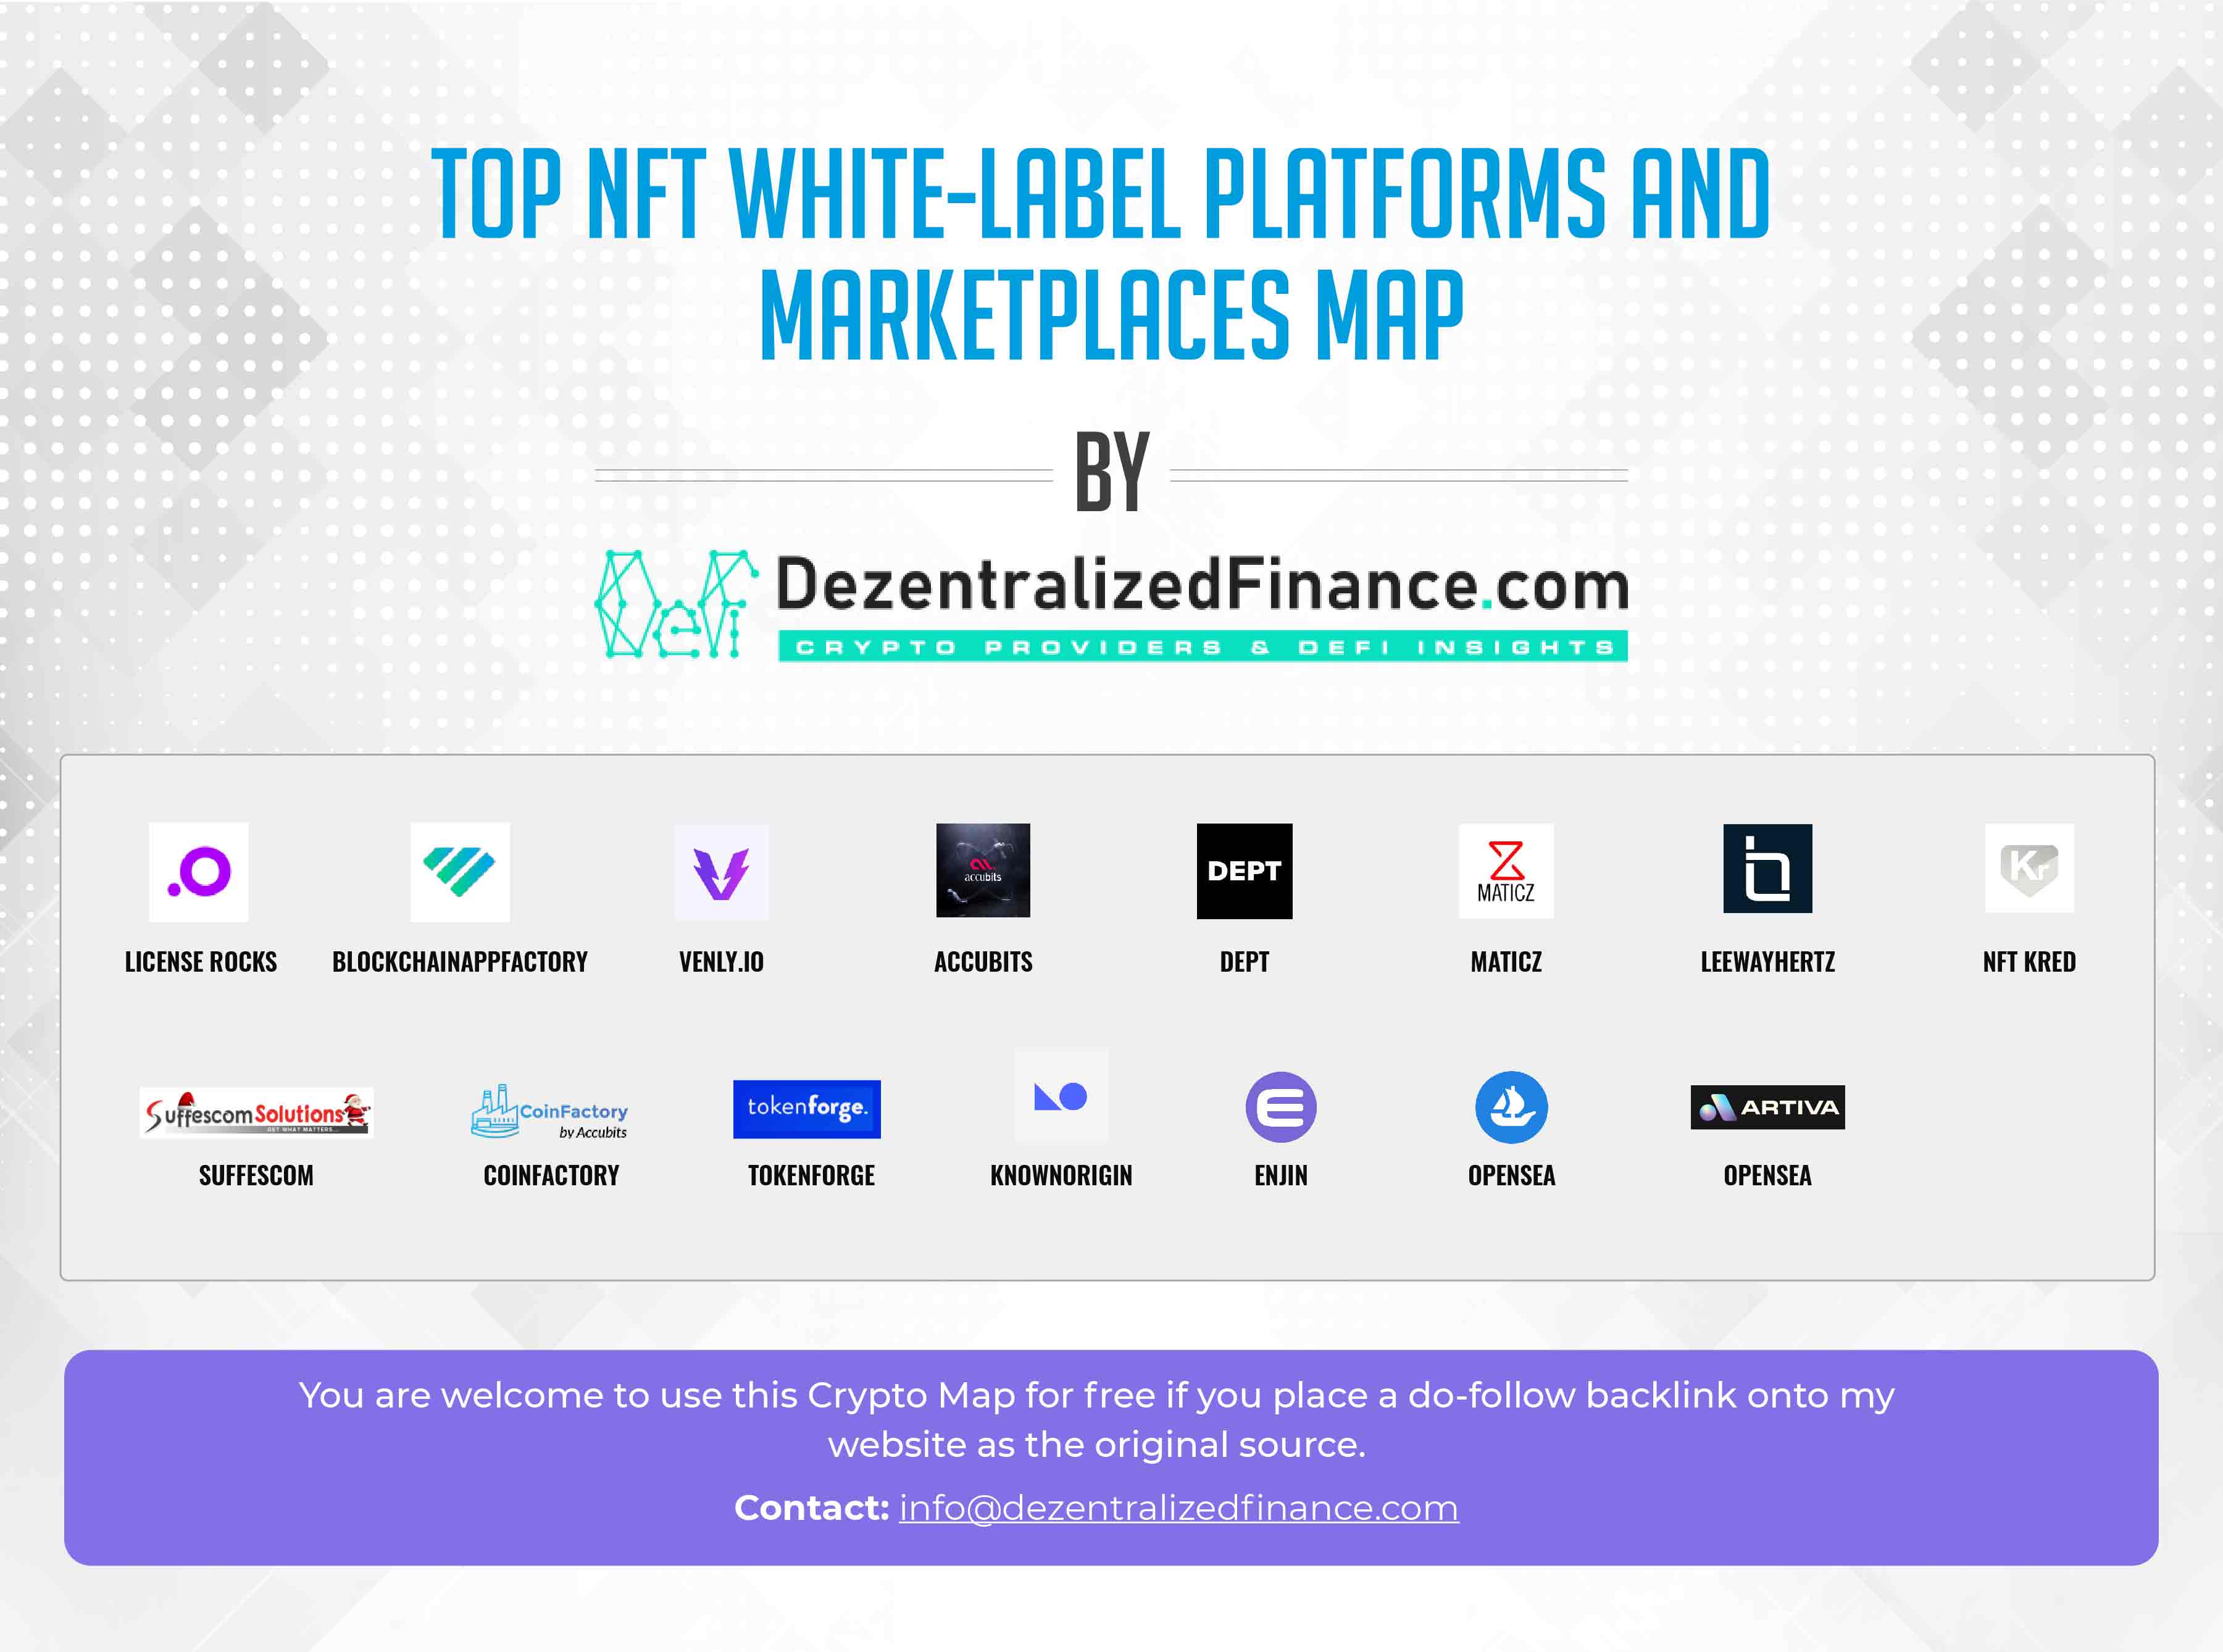 Top NFT White Label Platforms and Marketplaces